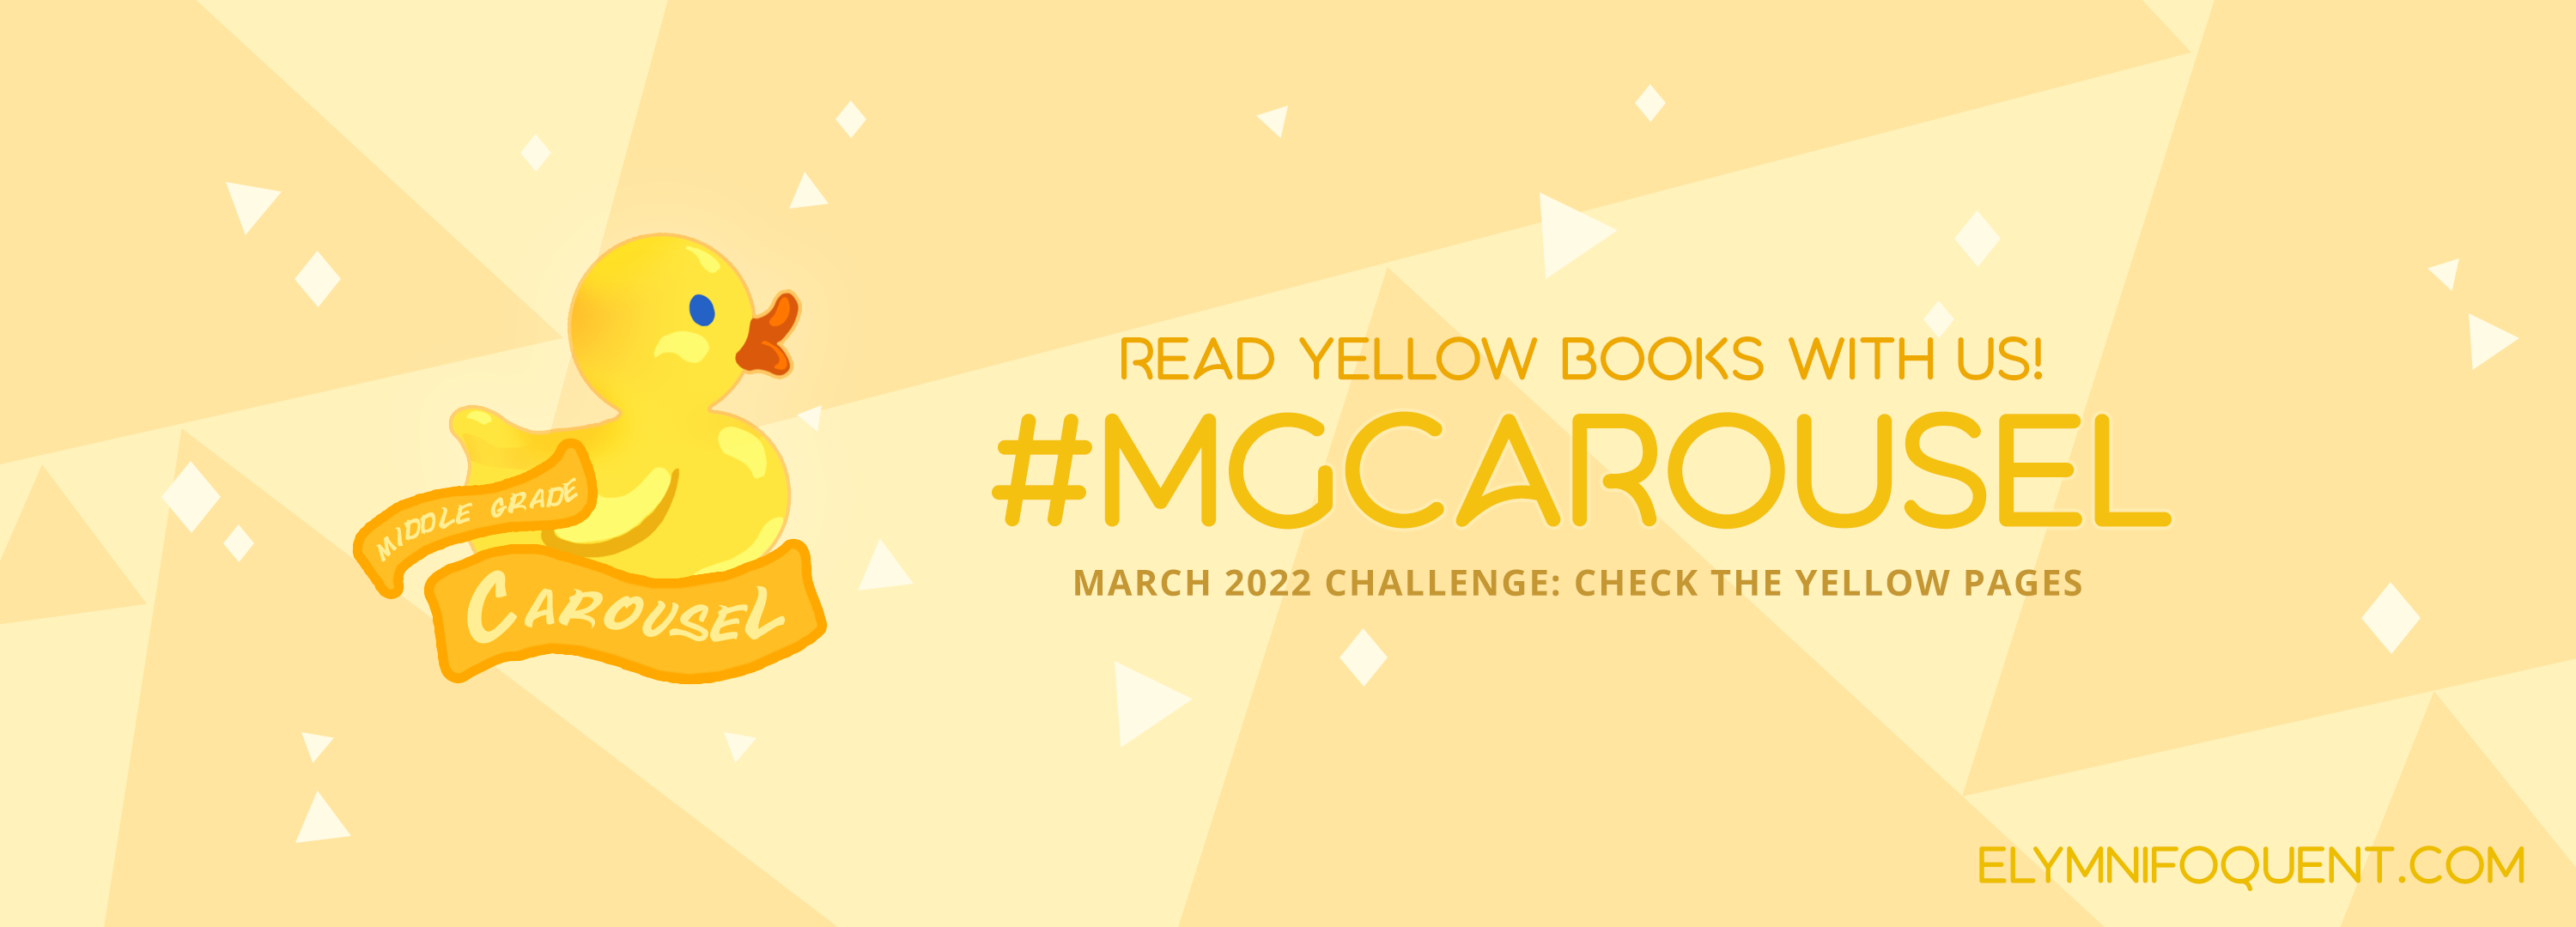 Social media banner for Middle Grade Carousel's March 2022 reading challenge. Text: "Read yellow books with us! #MGCarousel March 2022 Challenge: Check the Yellow Pages at Elymnifoquent.com."